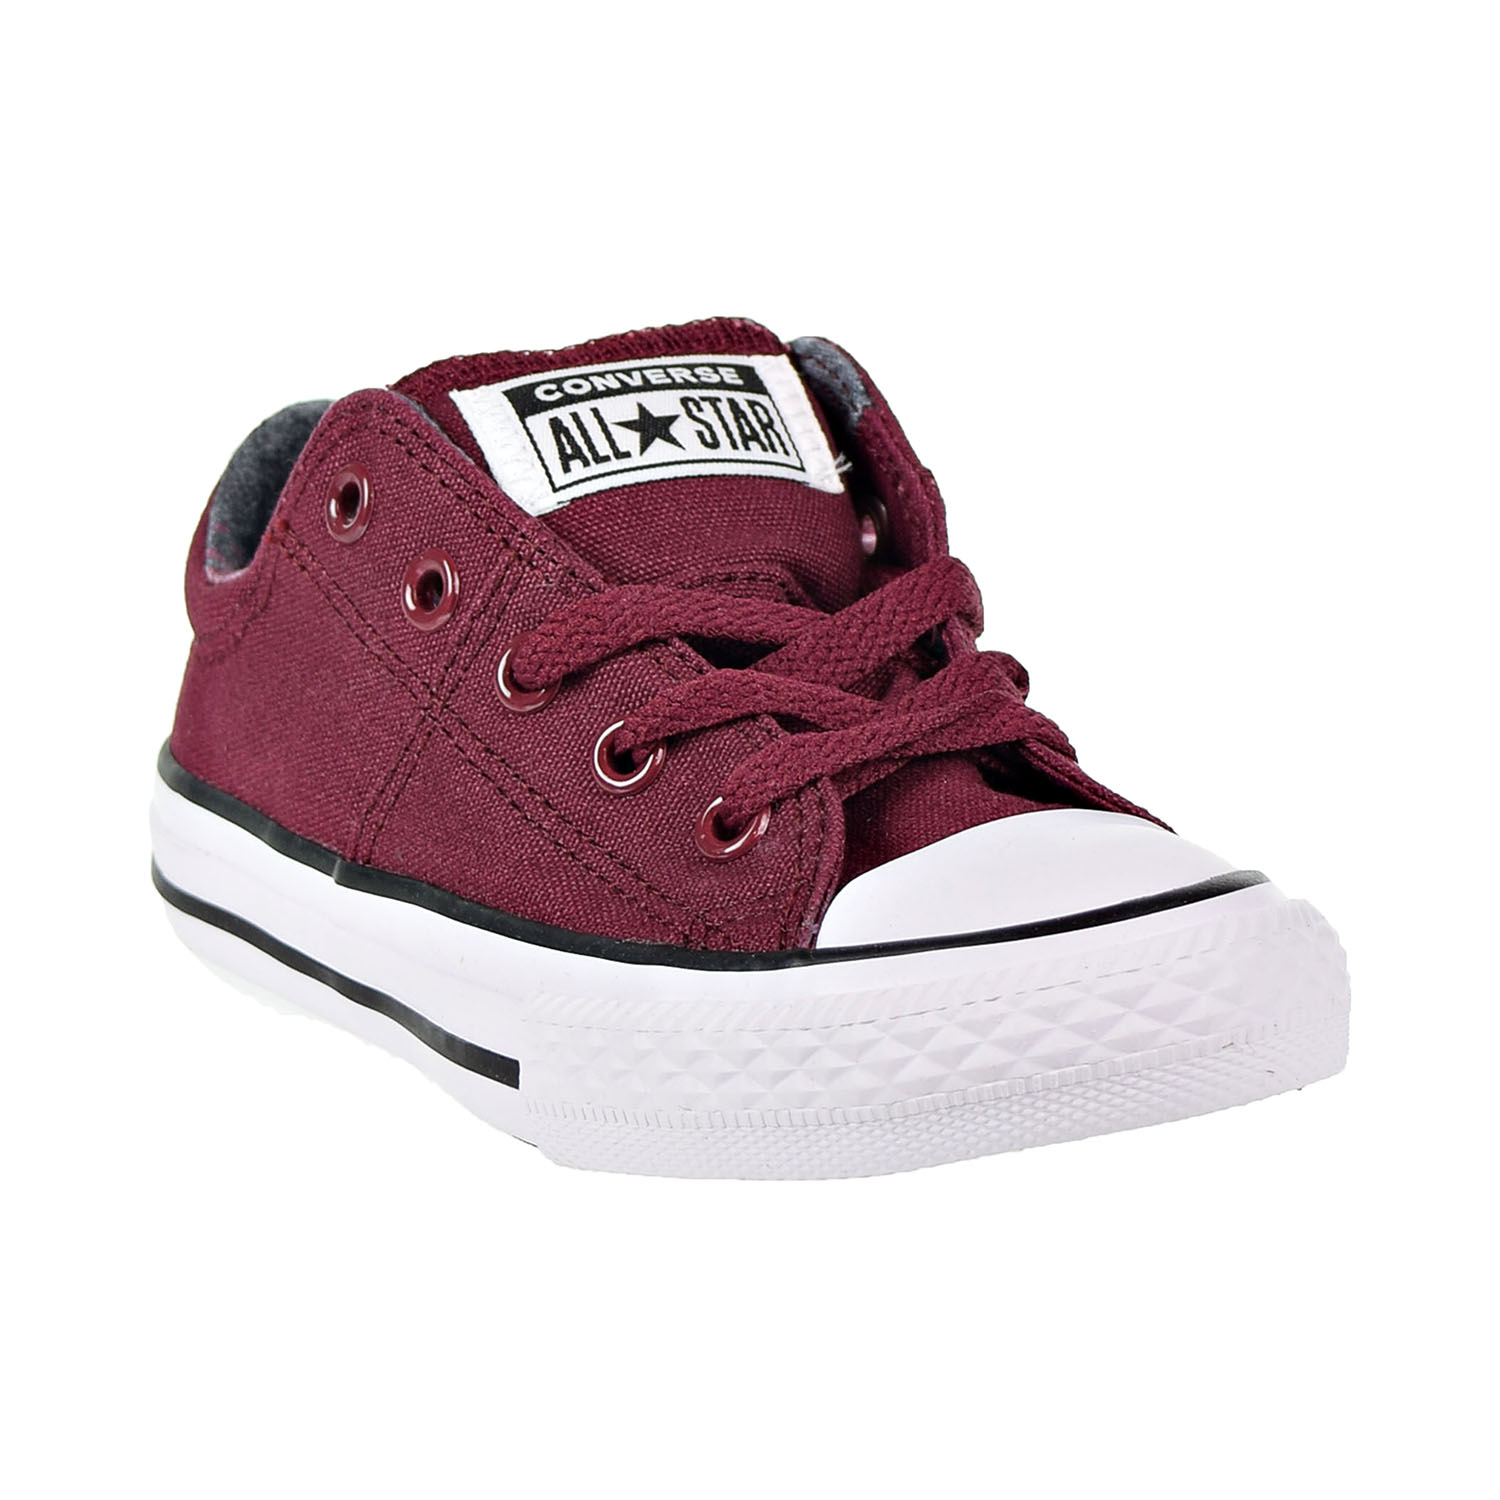 Converse Chuck Taylor All Star Madison Ox Little Kids/Big Kids Shoes Burgundy 661912f - image 2 of 6